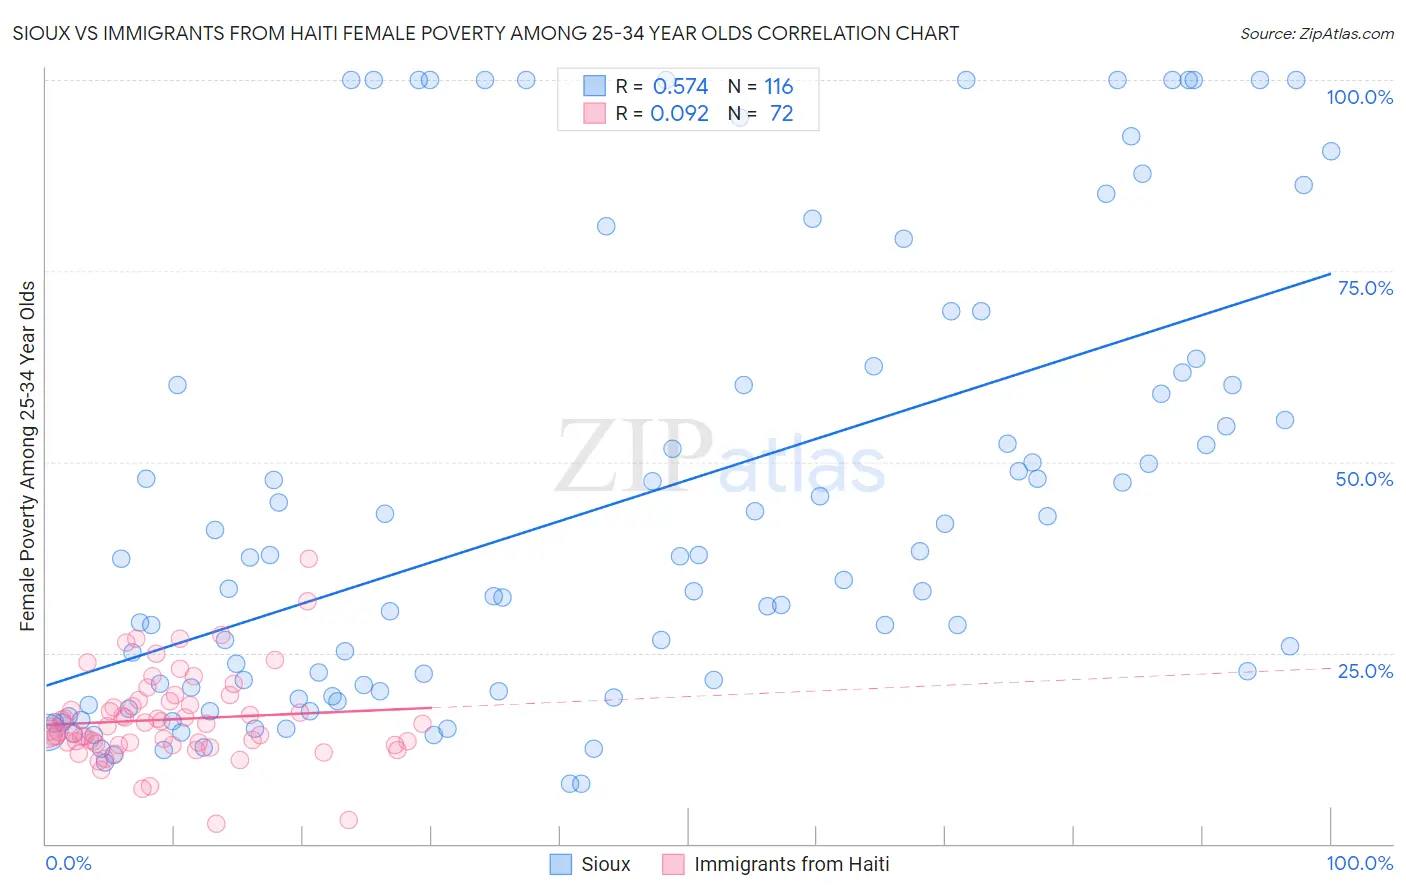 Sioux vs Immigrants from Haiti Female Poverty Among 25-34 Year Olds